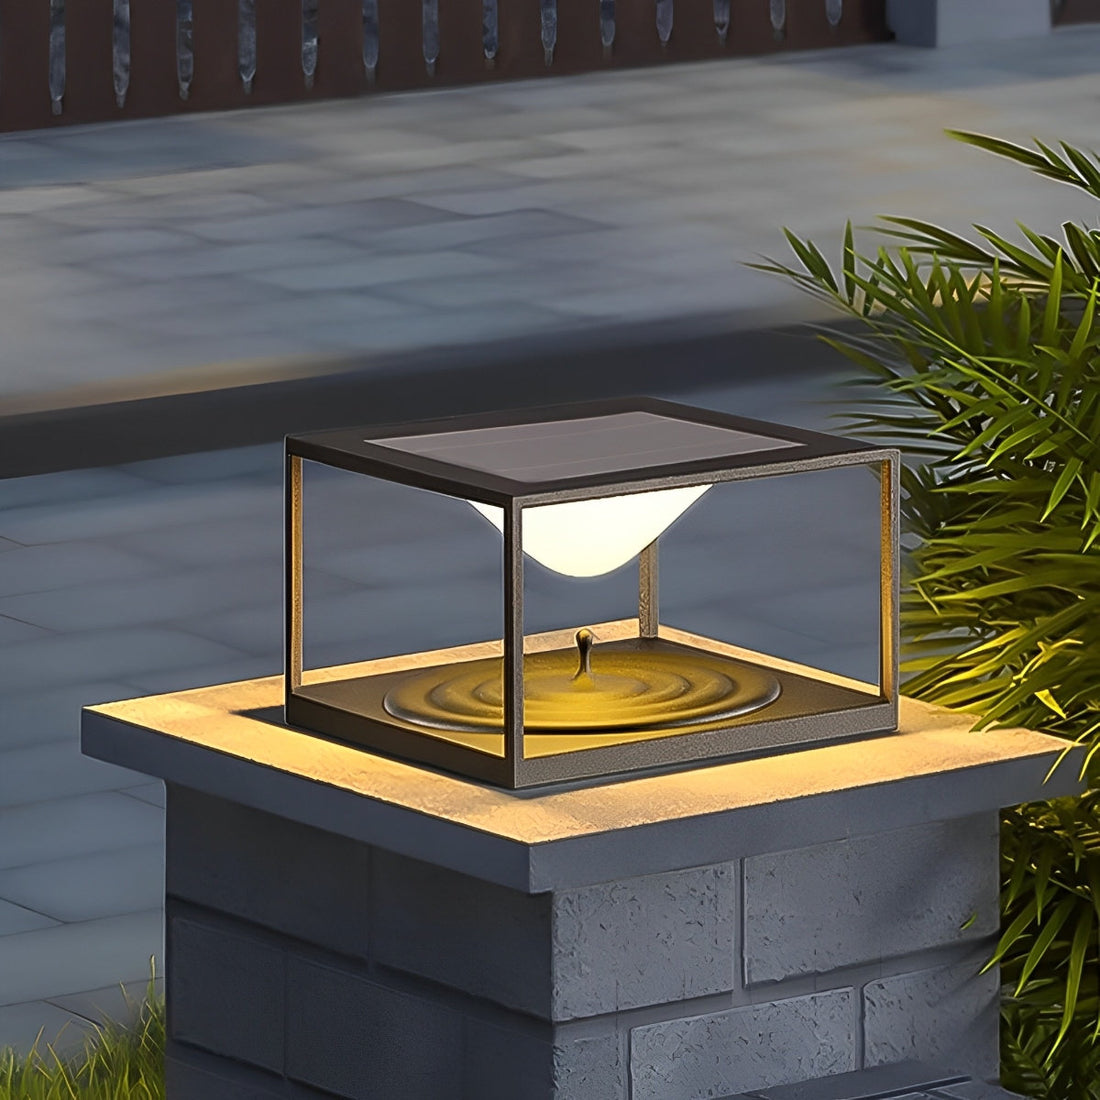 Solar Waterproof Square Dripping LED Outdoor Post Lights - Flyachilles